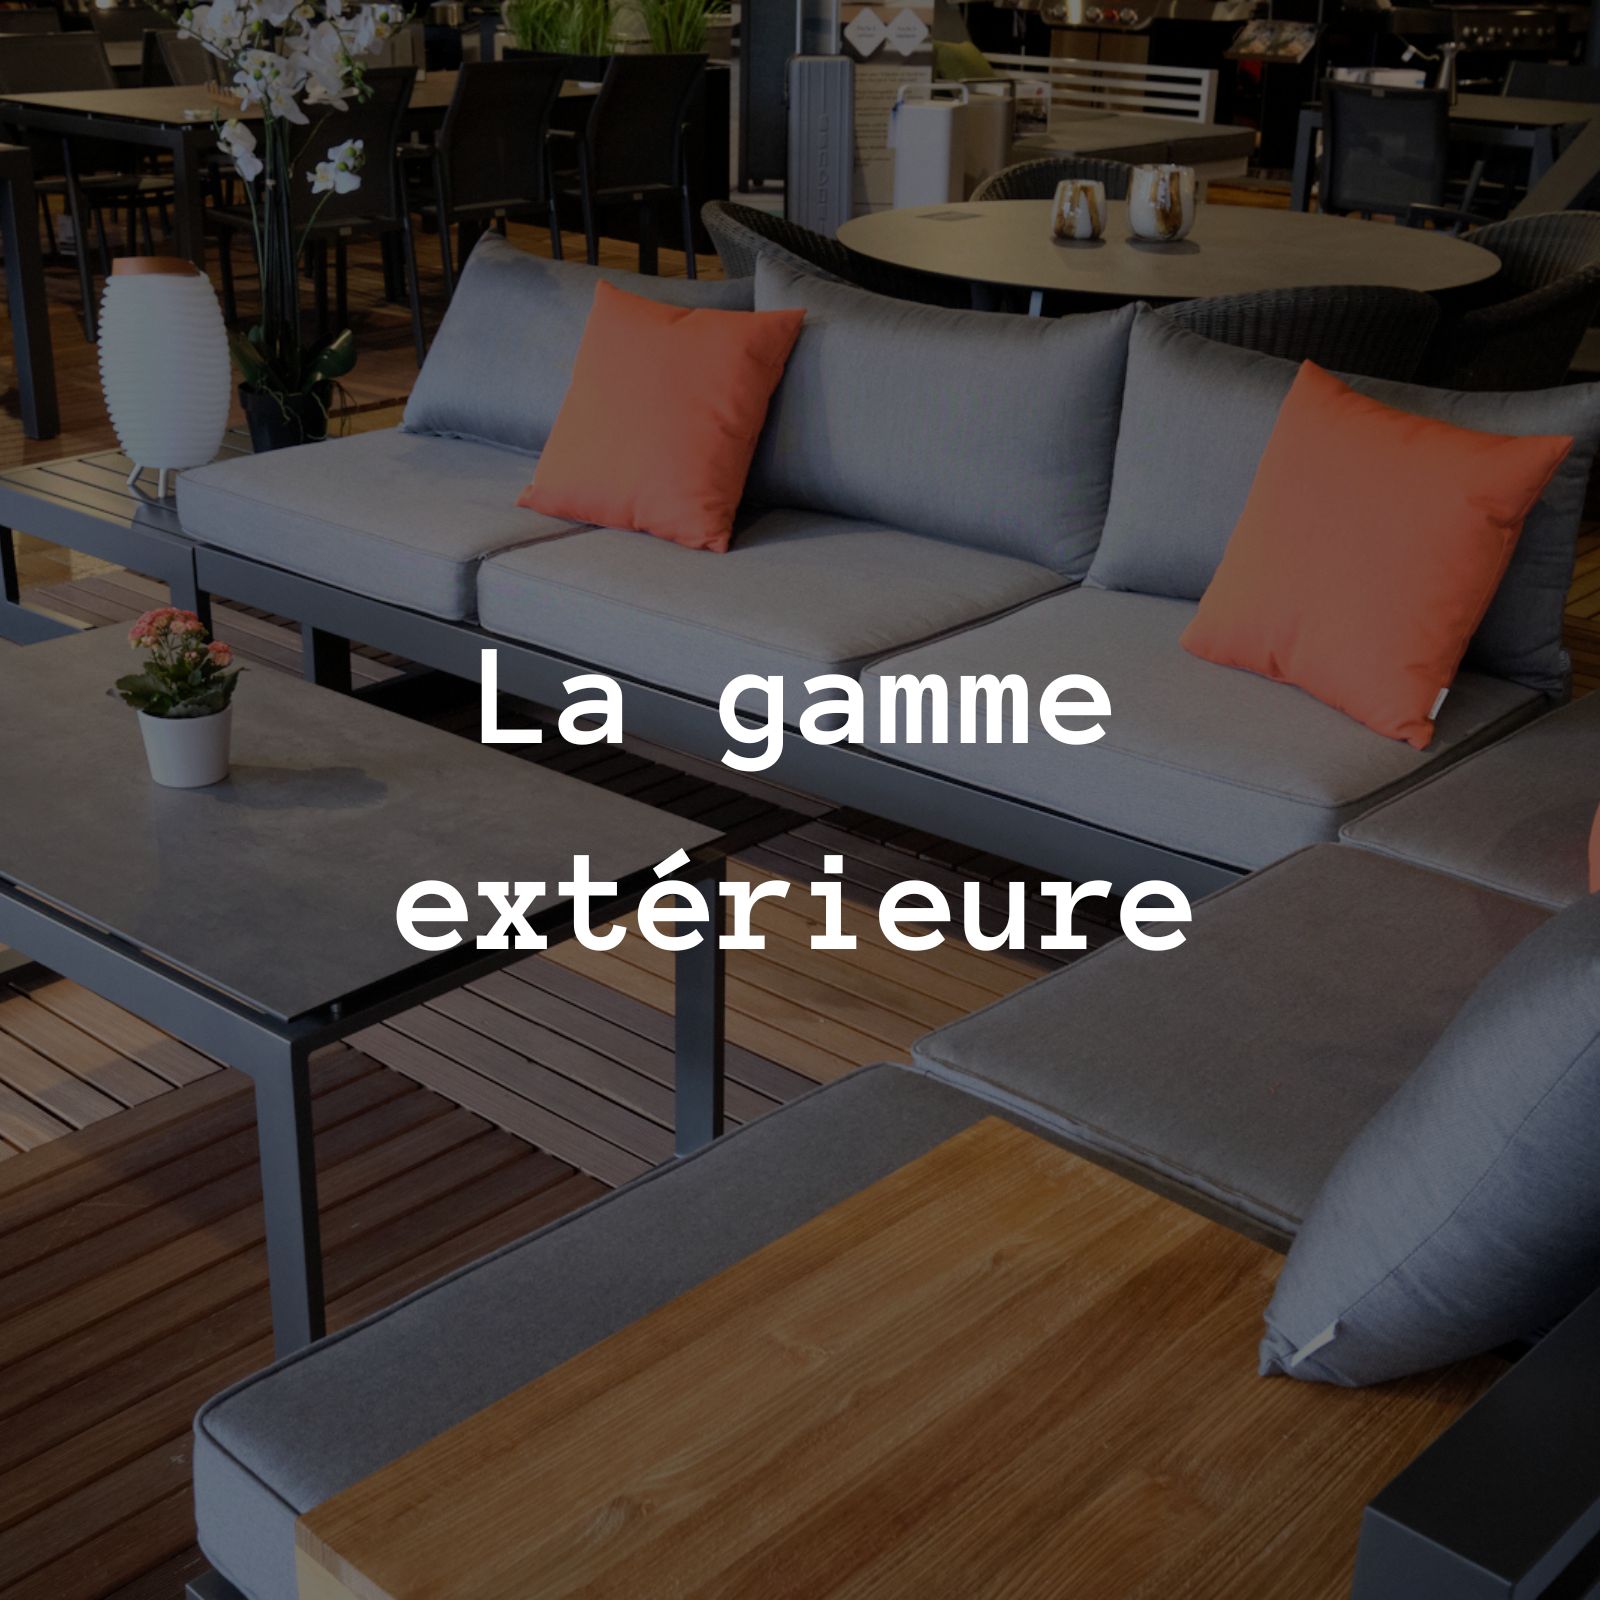 Gamme-ext_rieure